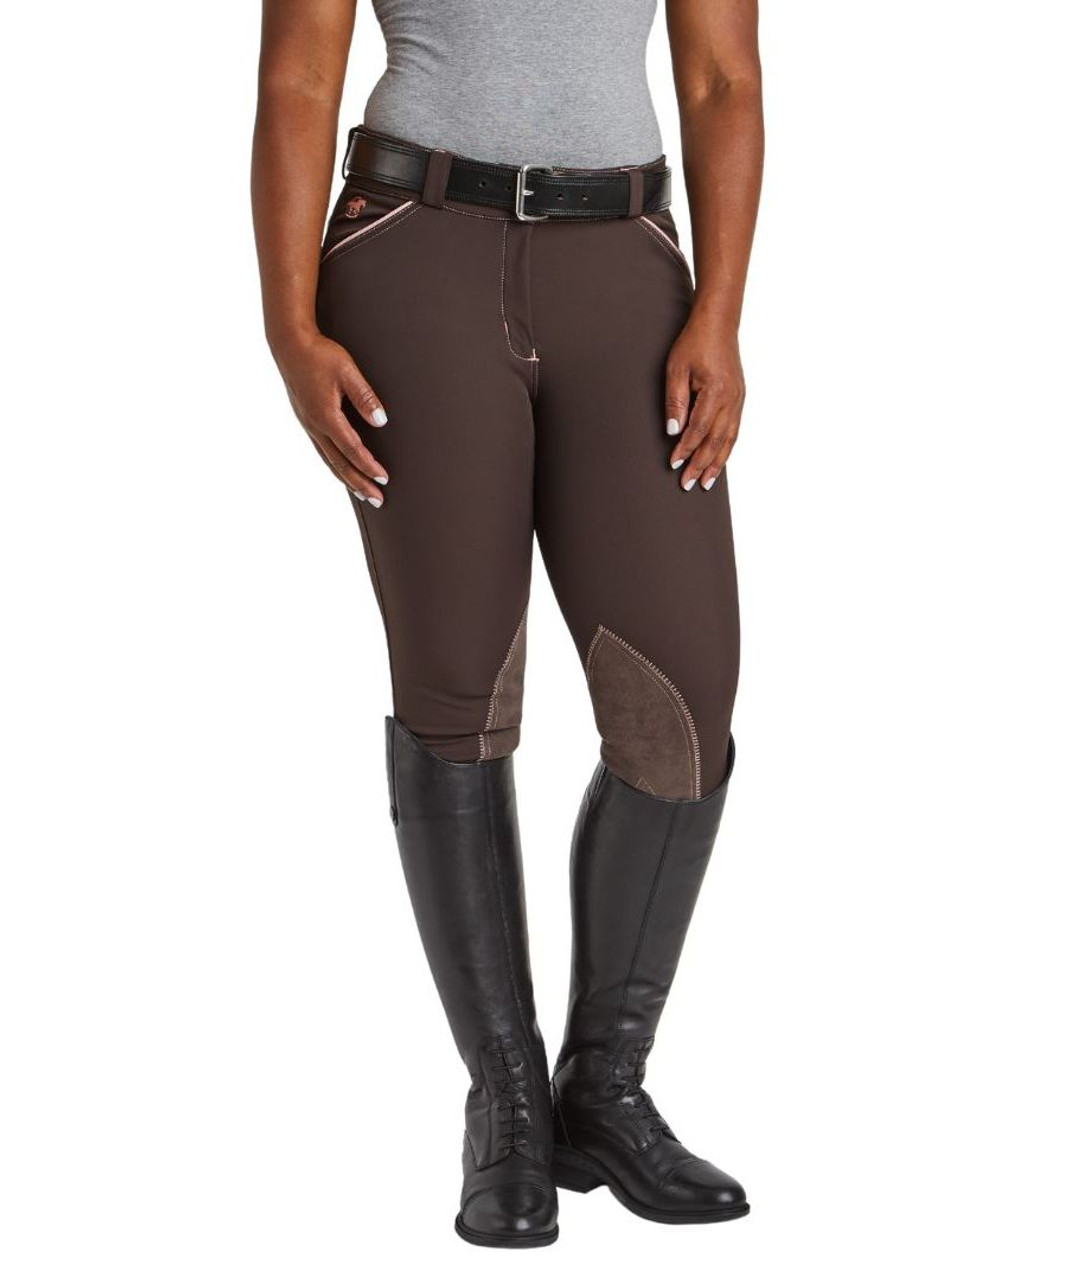 Piper Evolution Knee Patch Breeches- Women's Riding Clothes